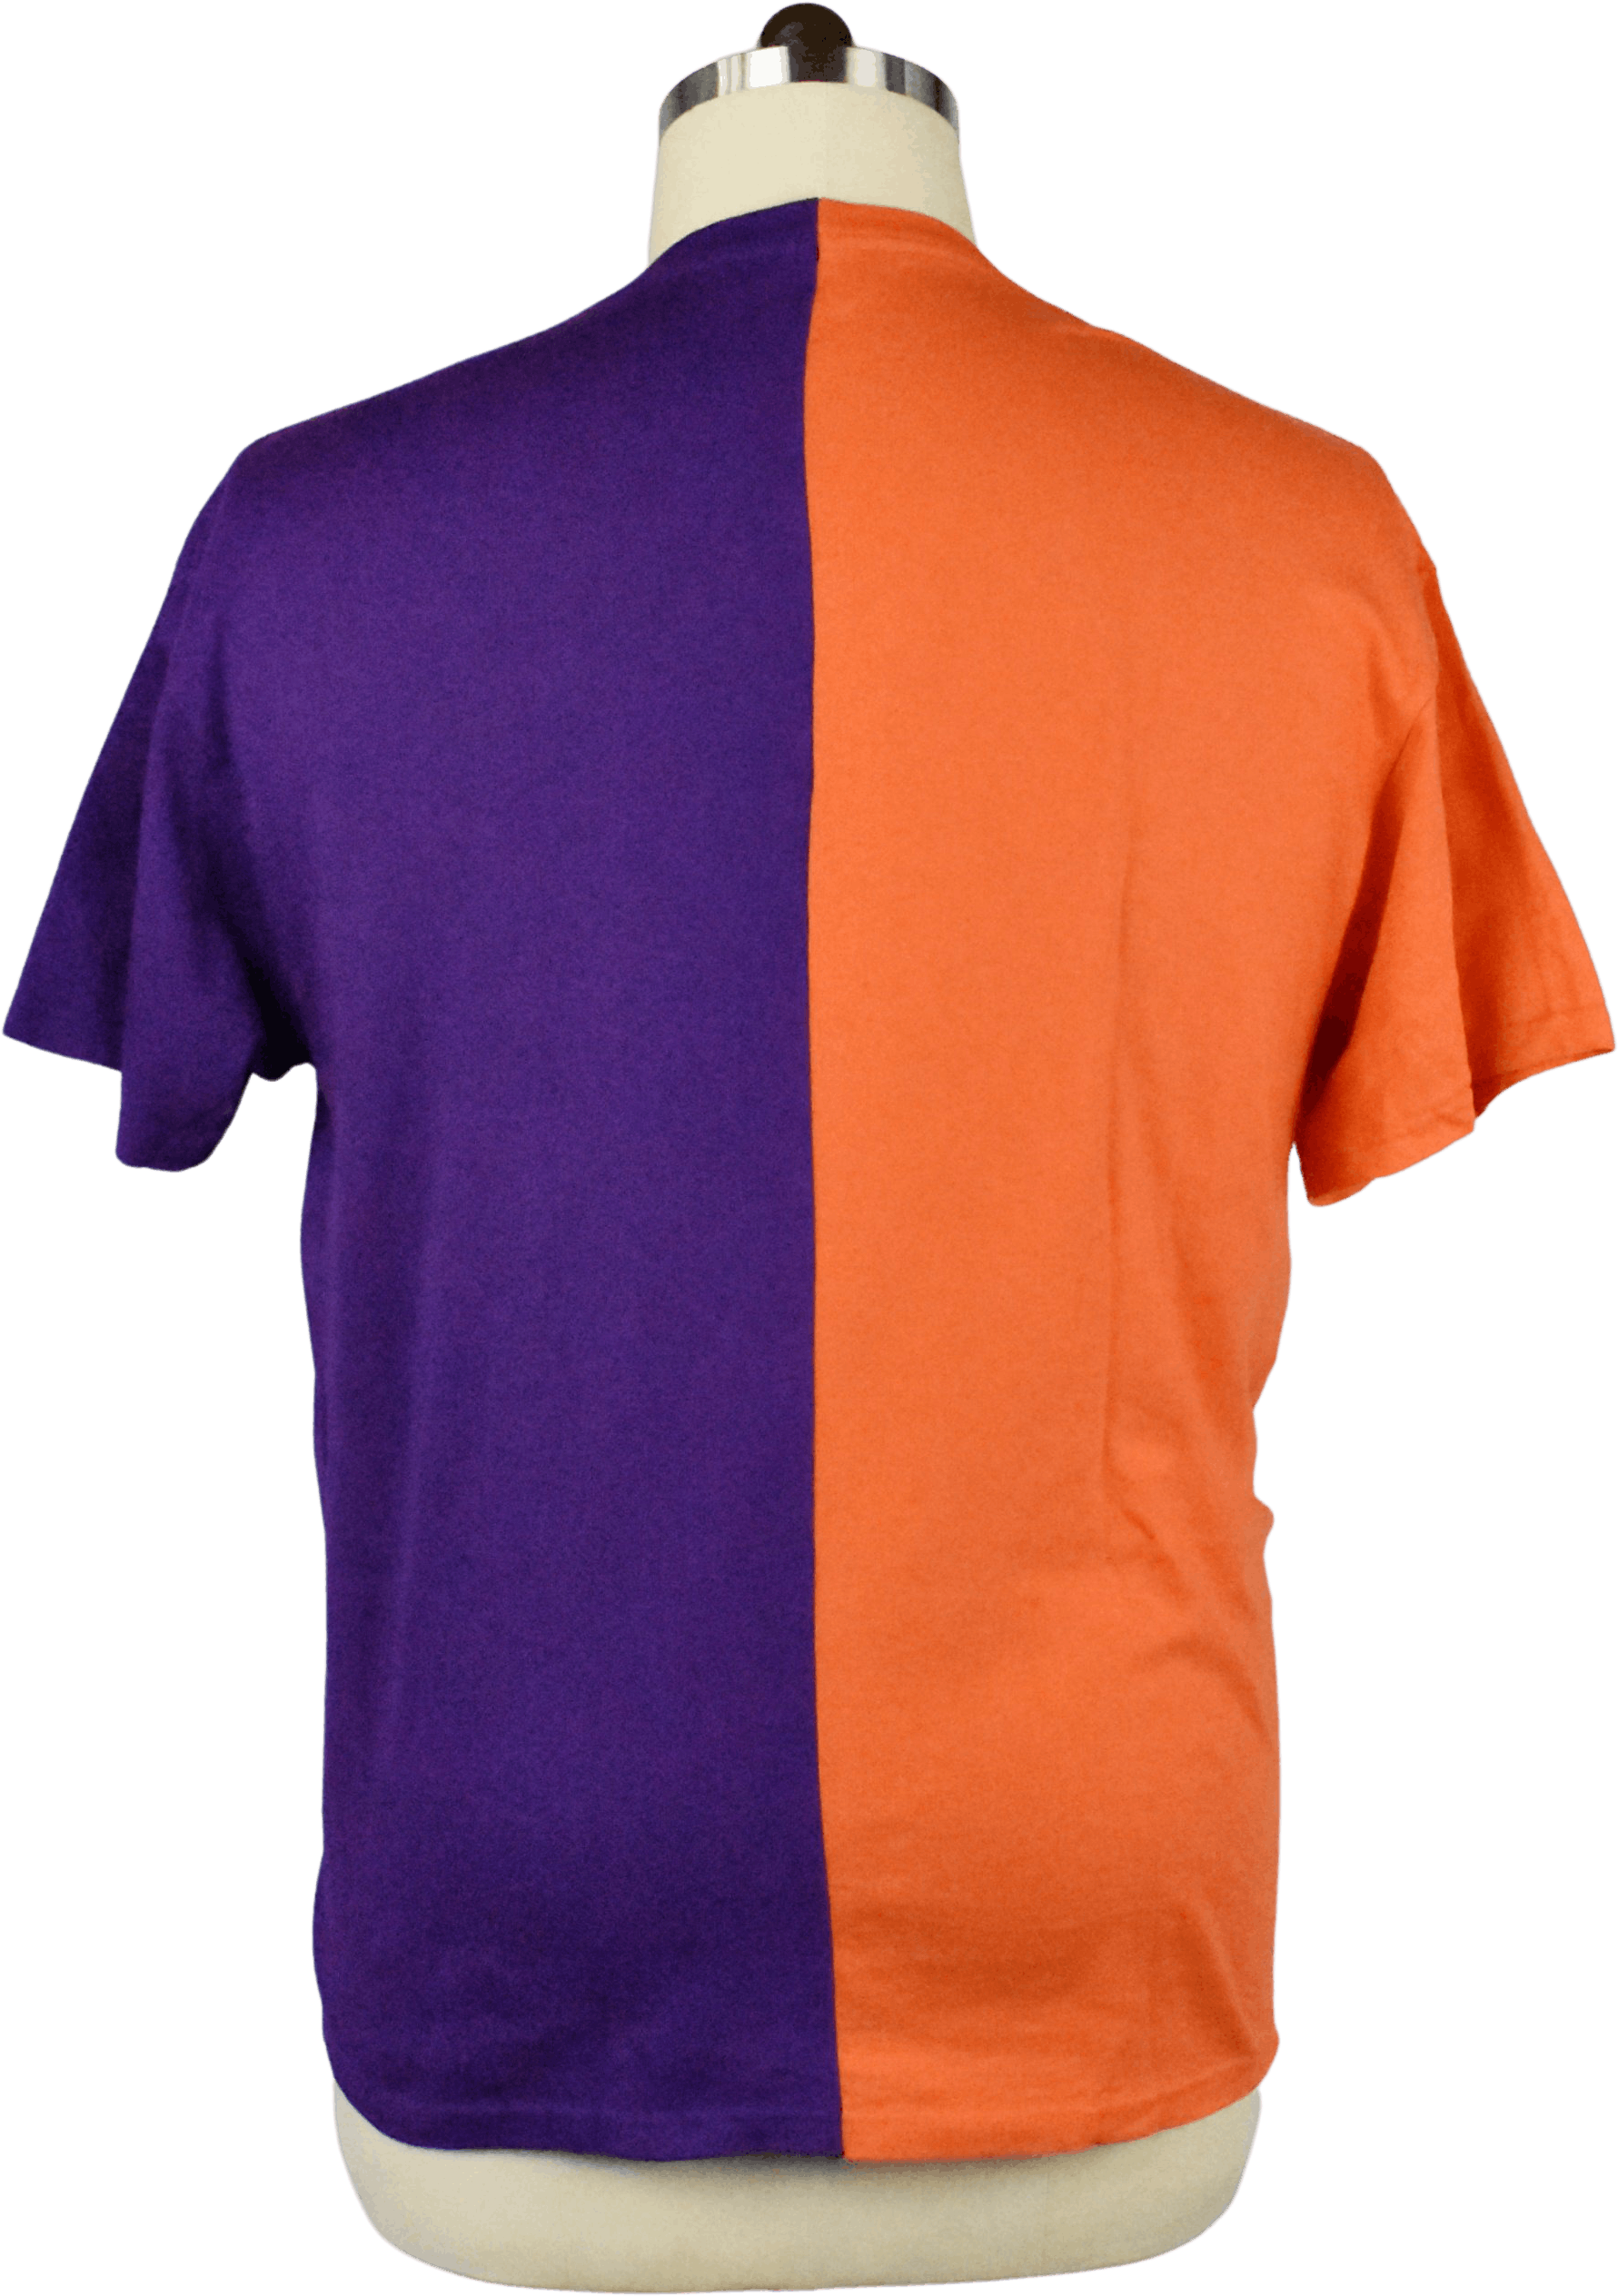 Vintage Two Tone Baltimore Orioles and Ravens T-Shirt